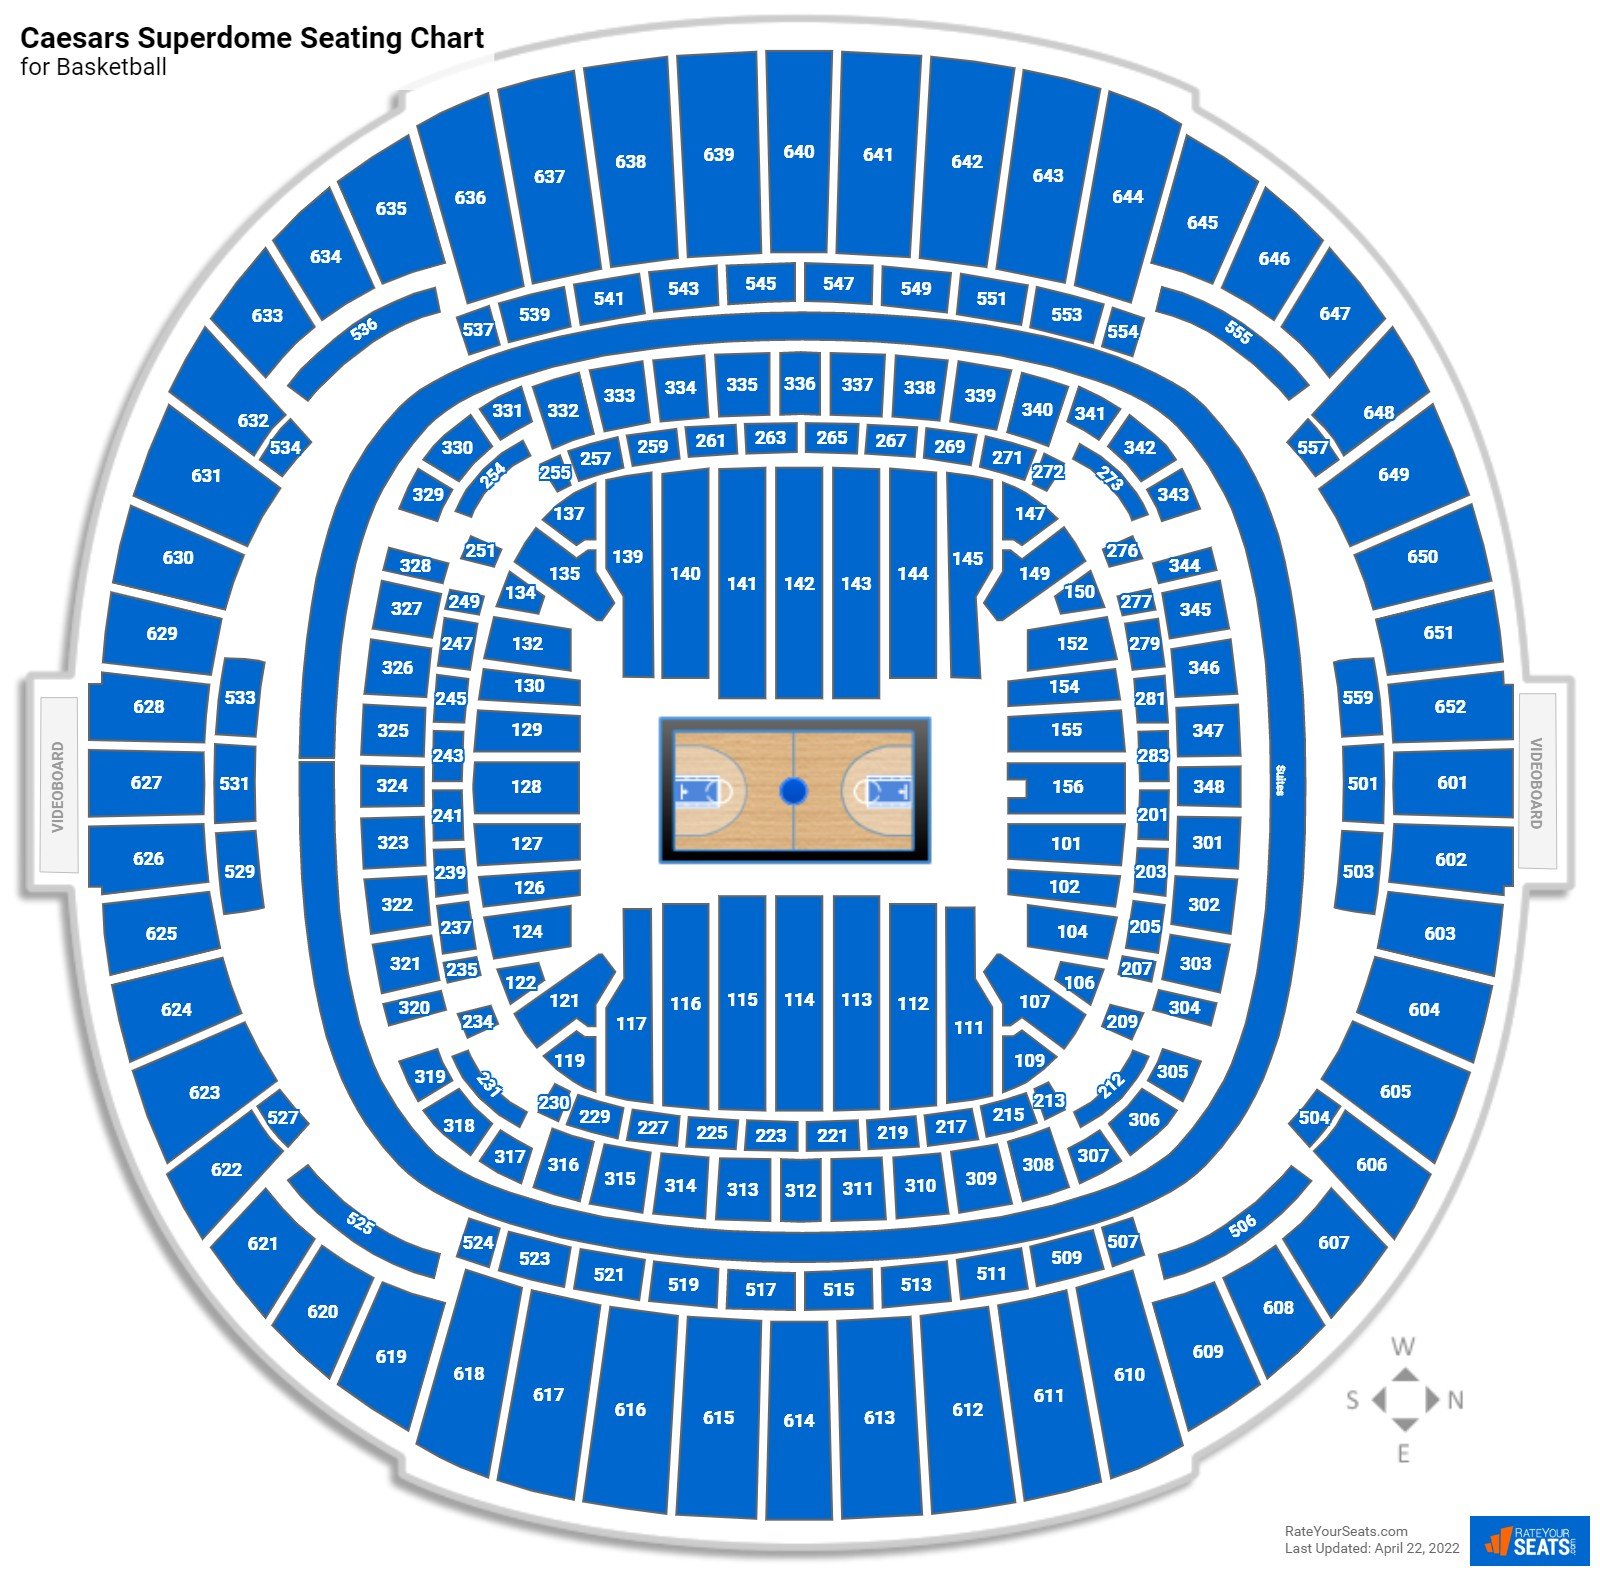 Seating Charts for Caesars Superdome.